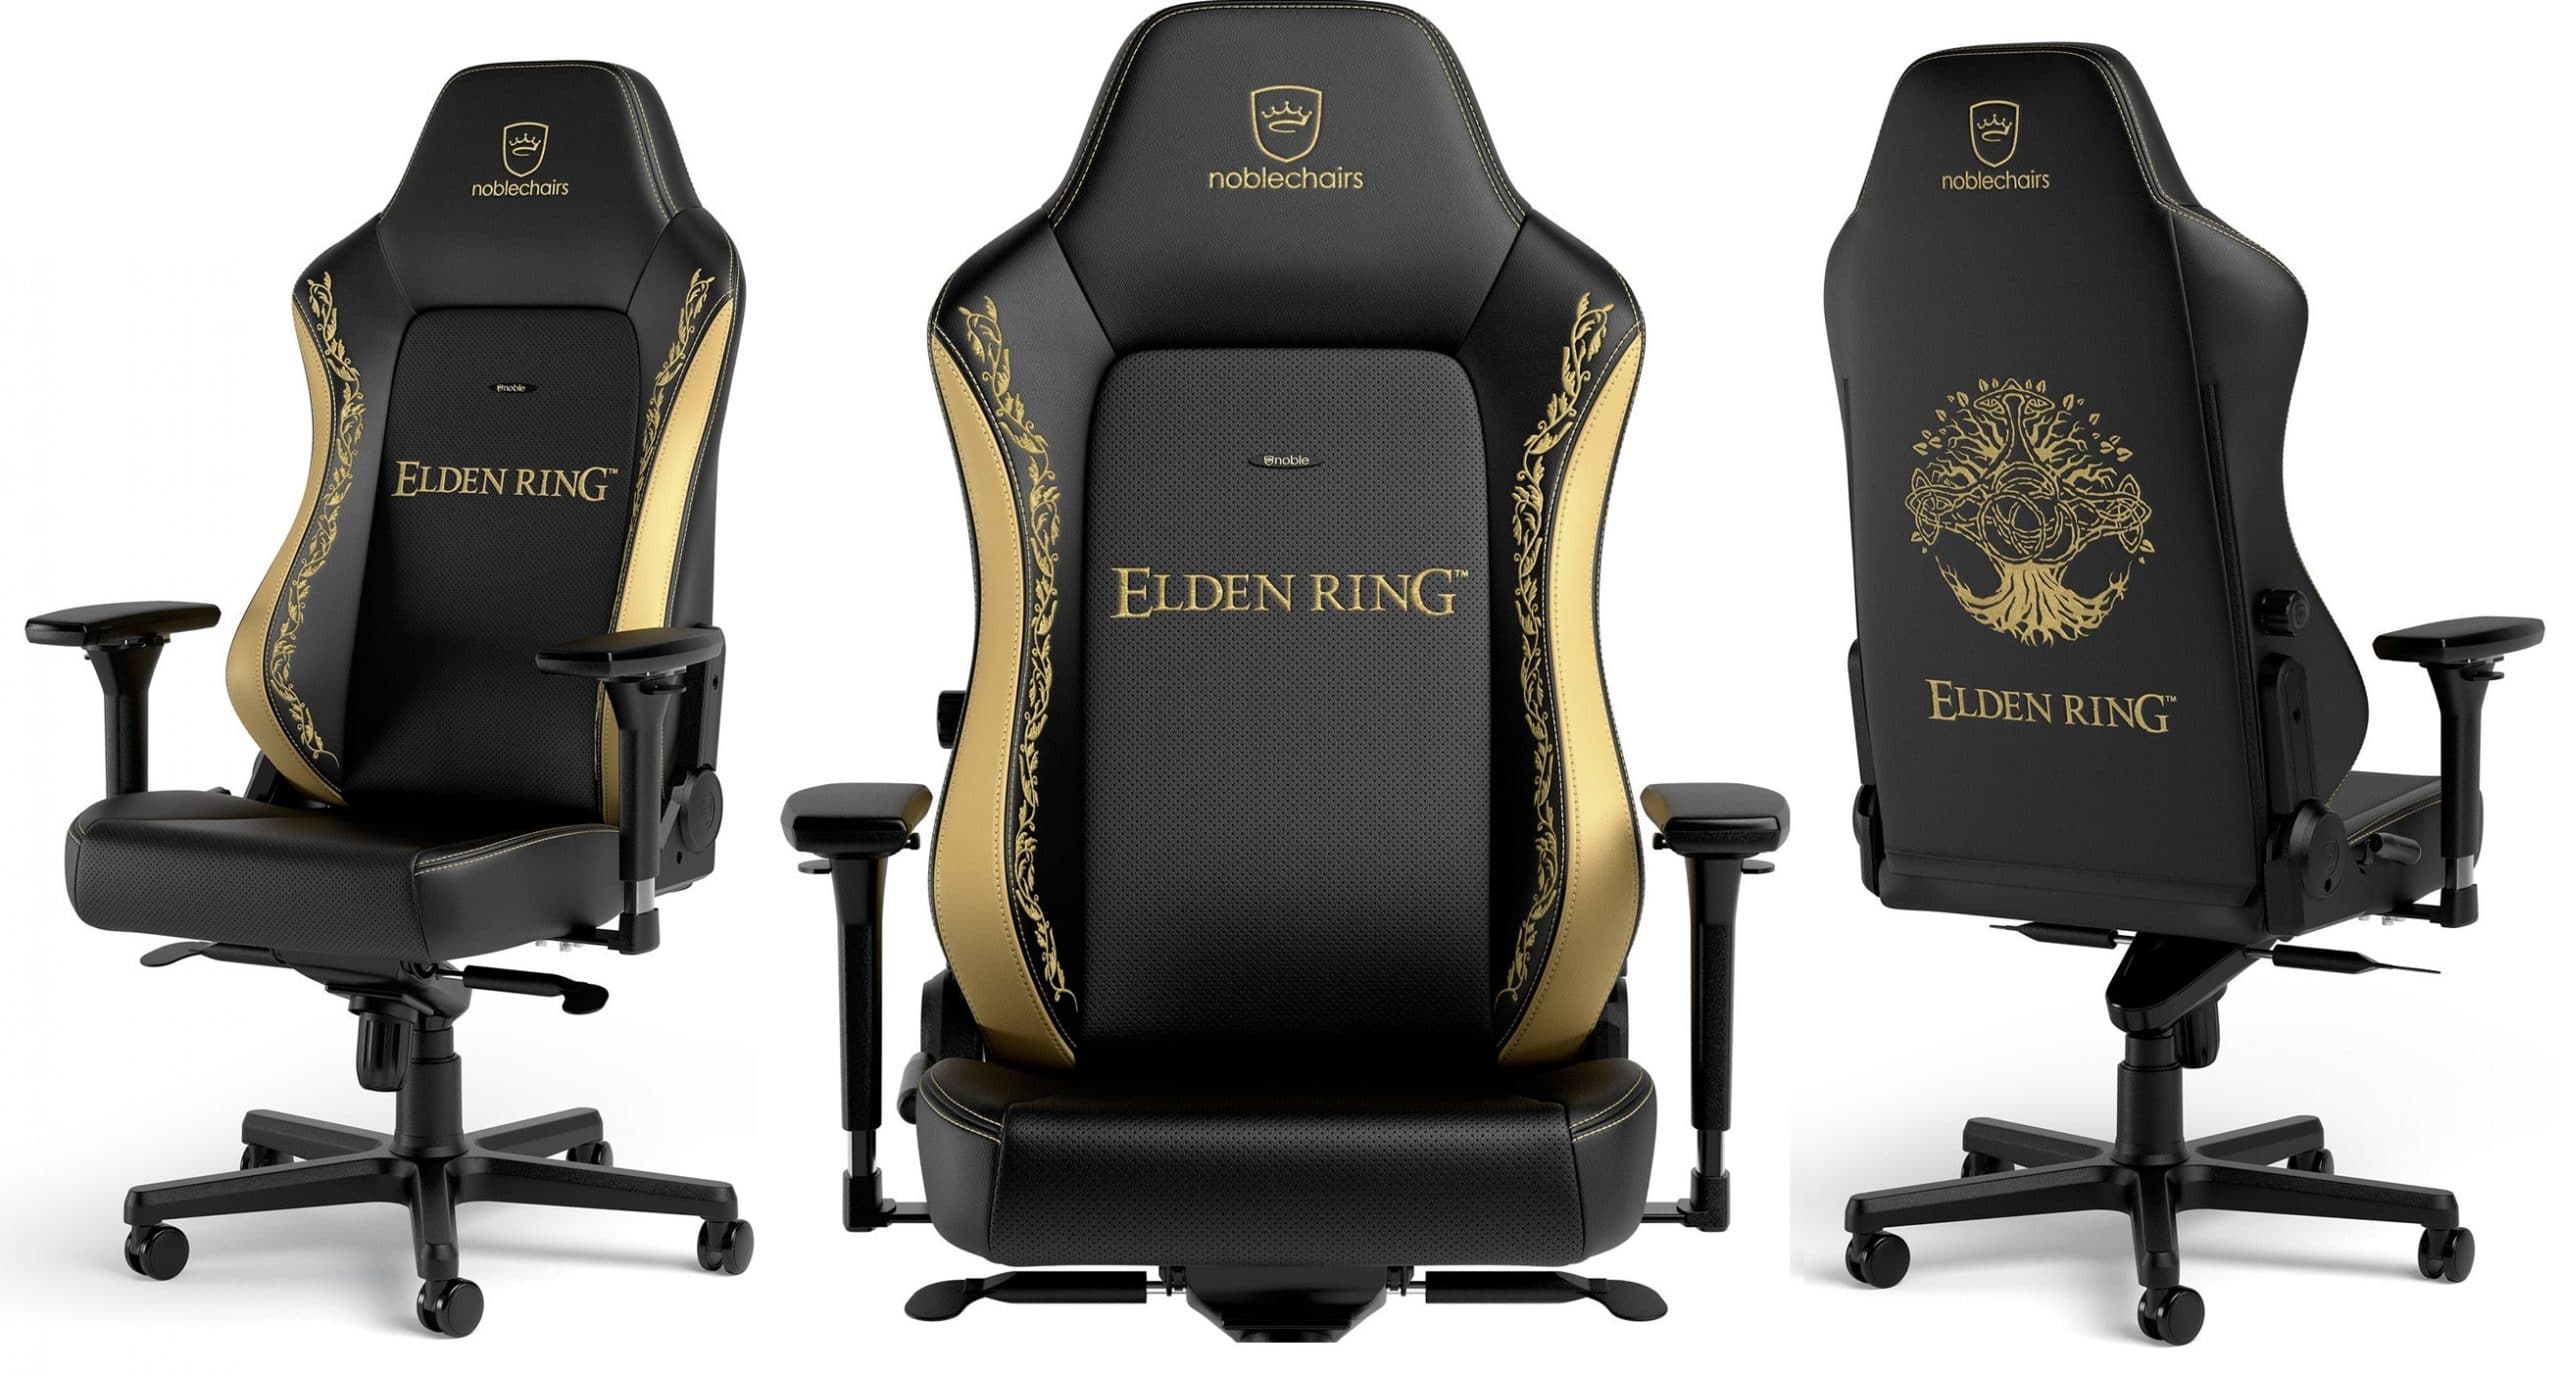 noblechairs announces its HERO gaming chair